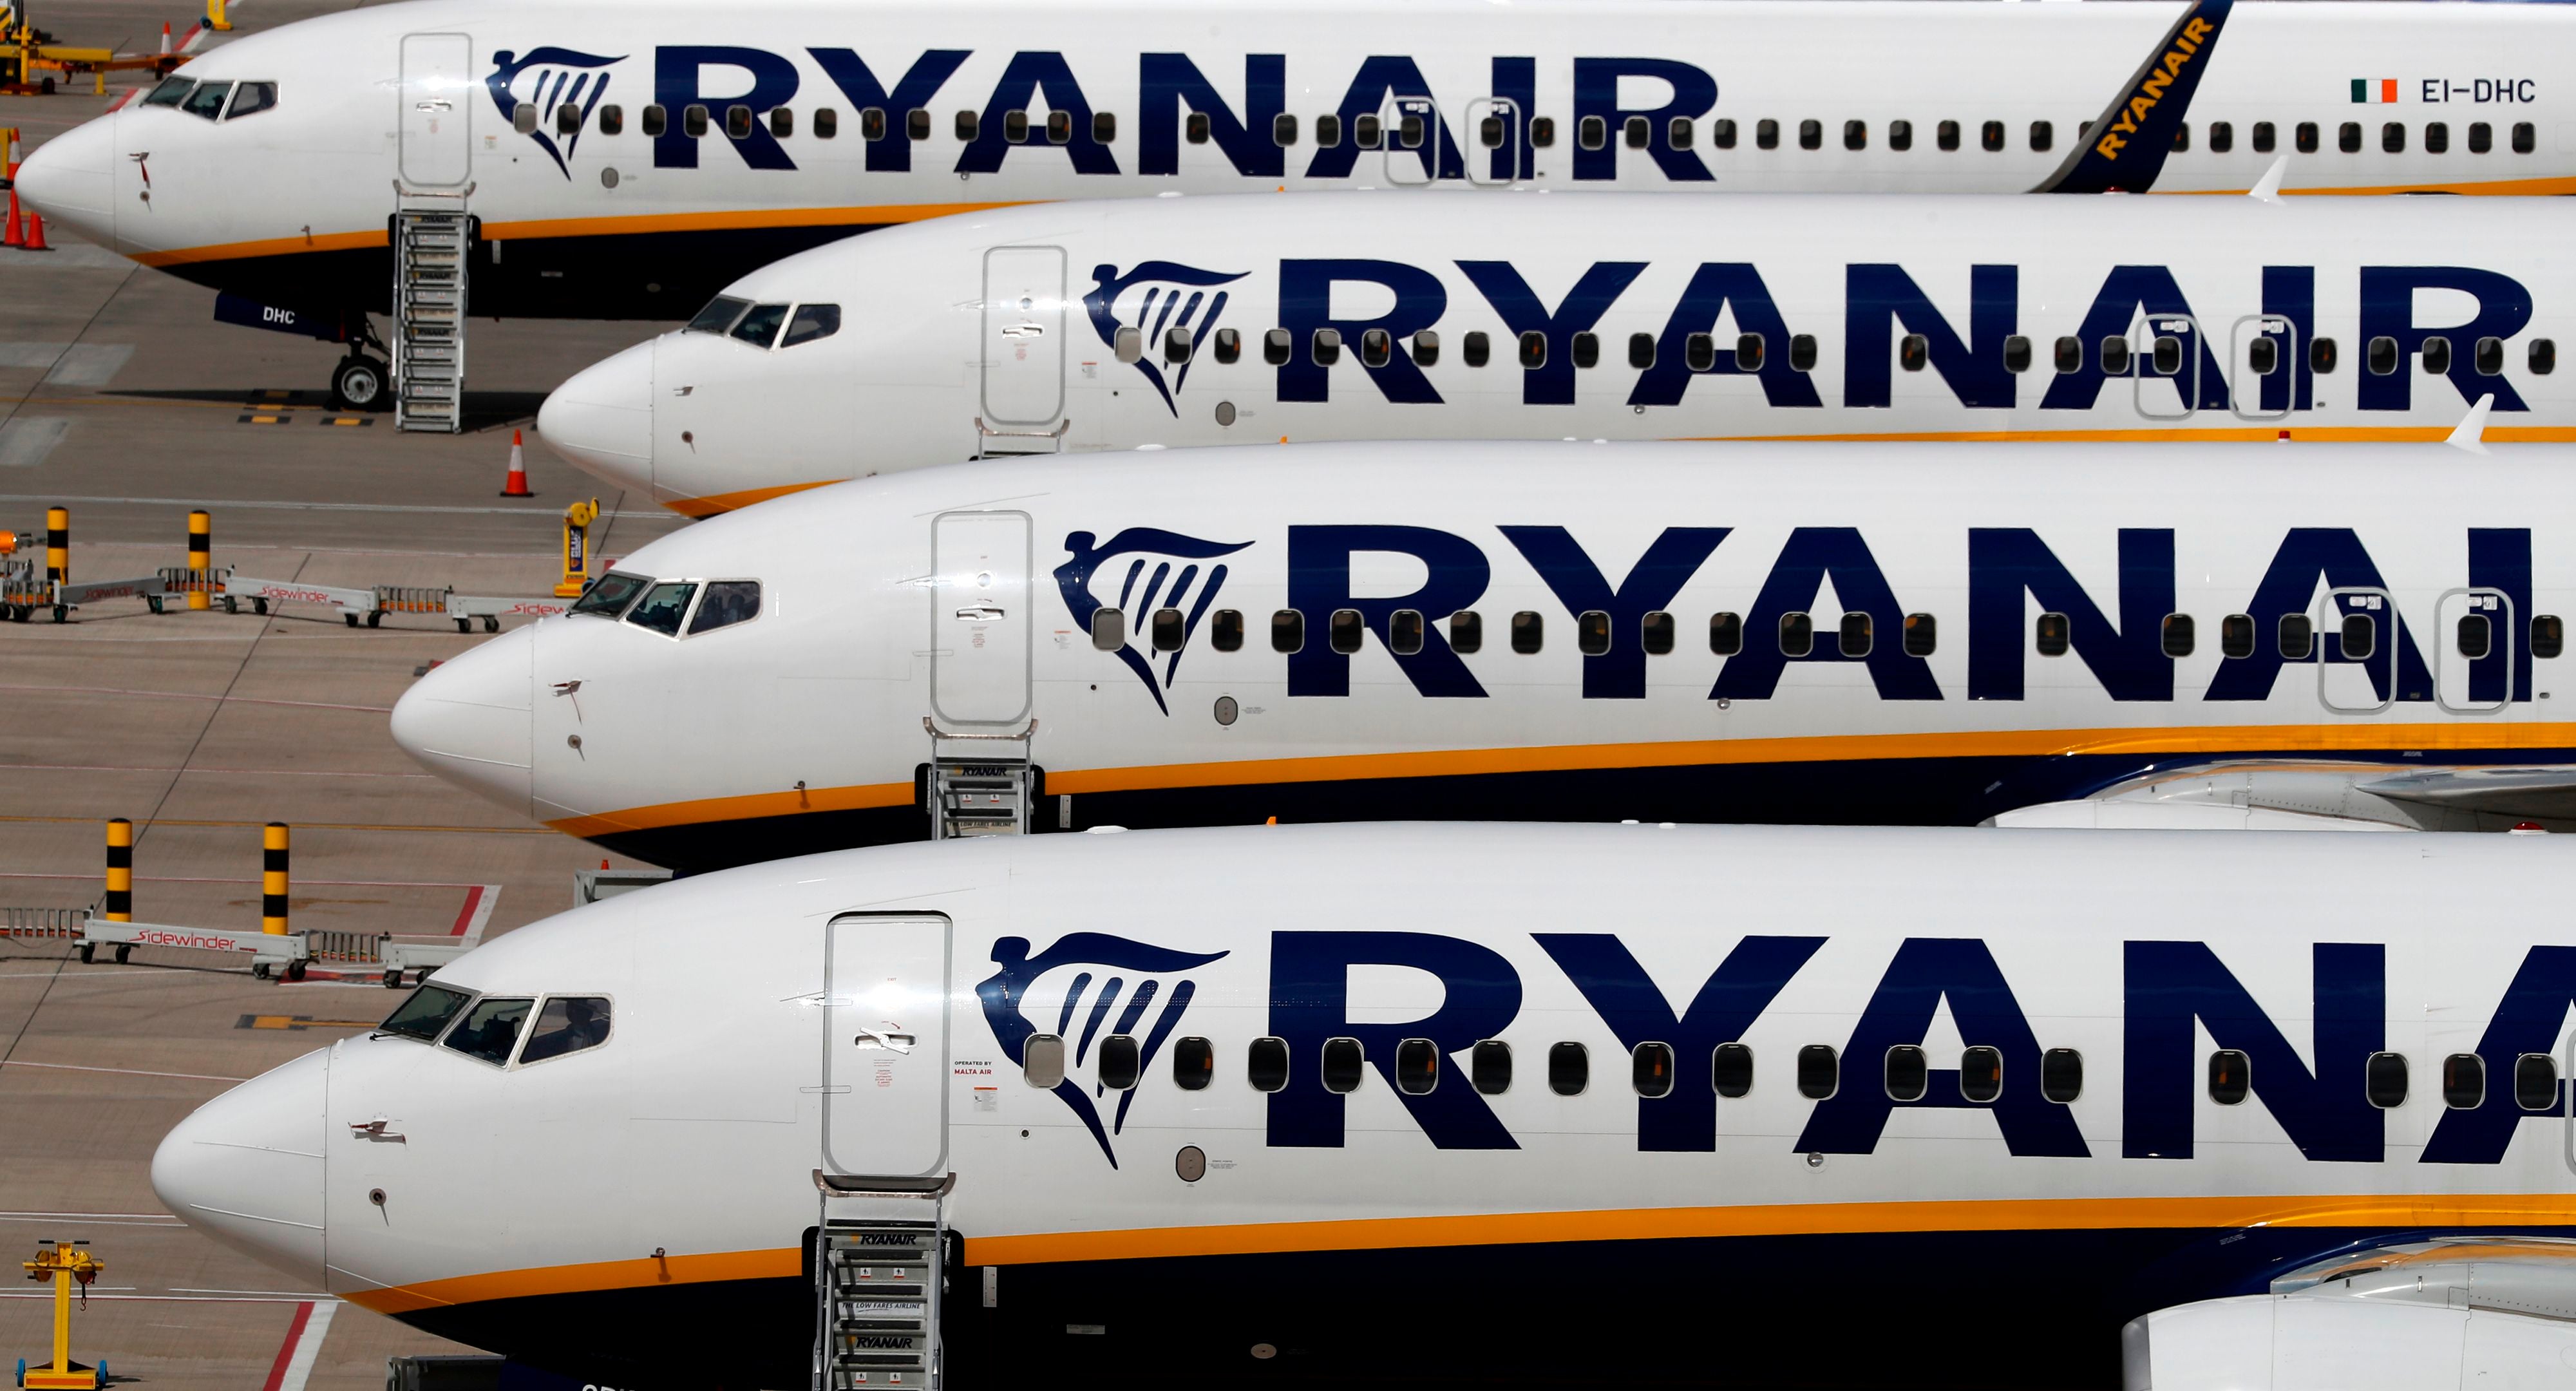 Ryanair says it ‘respectfully disagrees’ with ruling